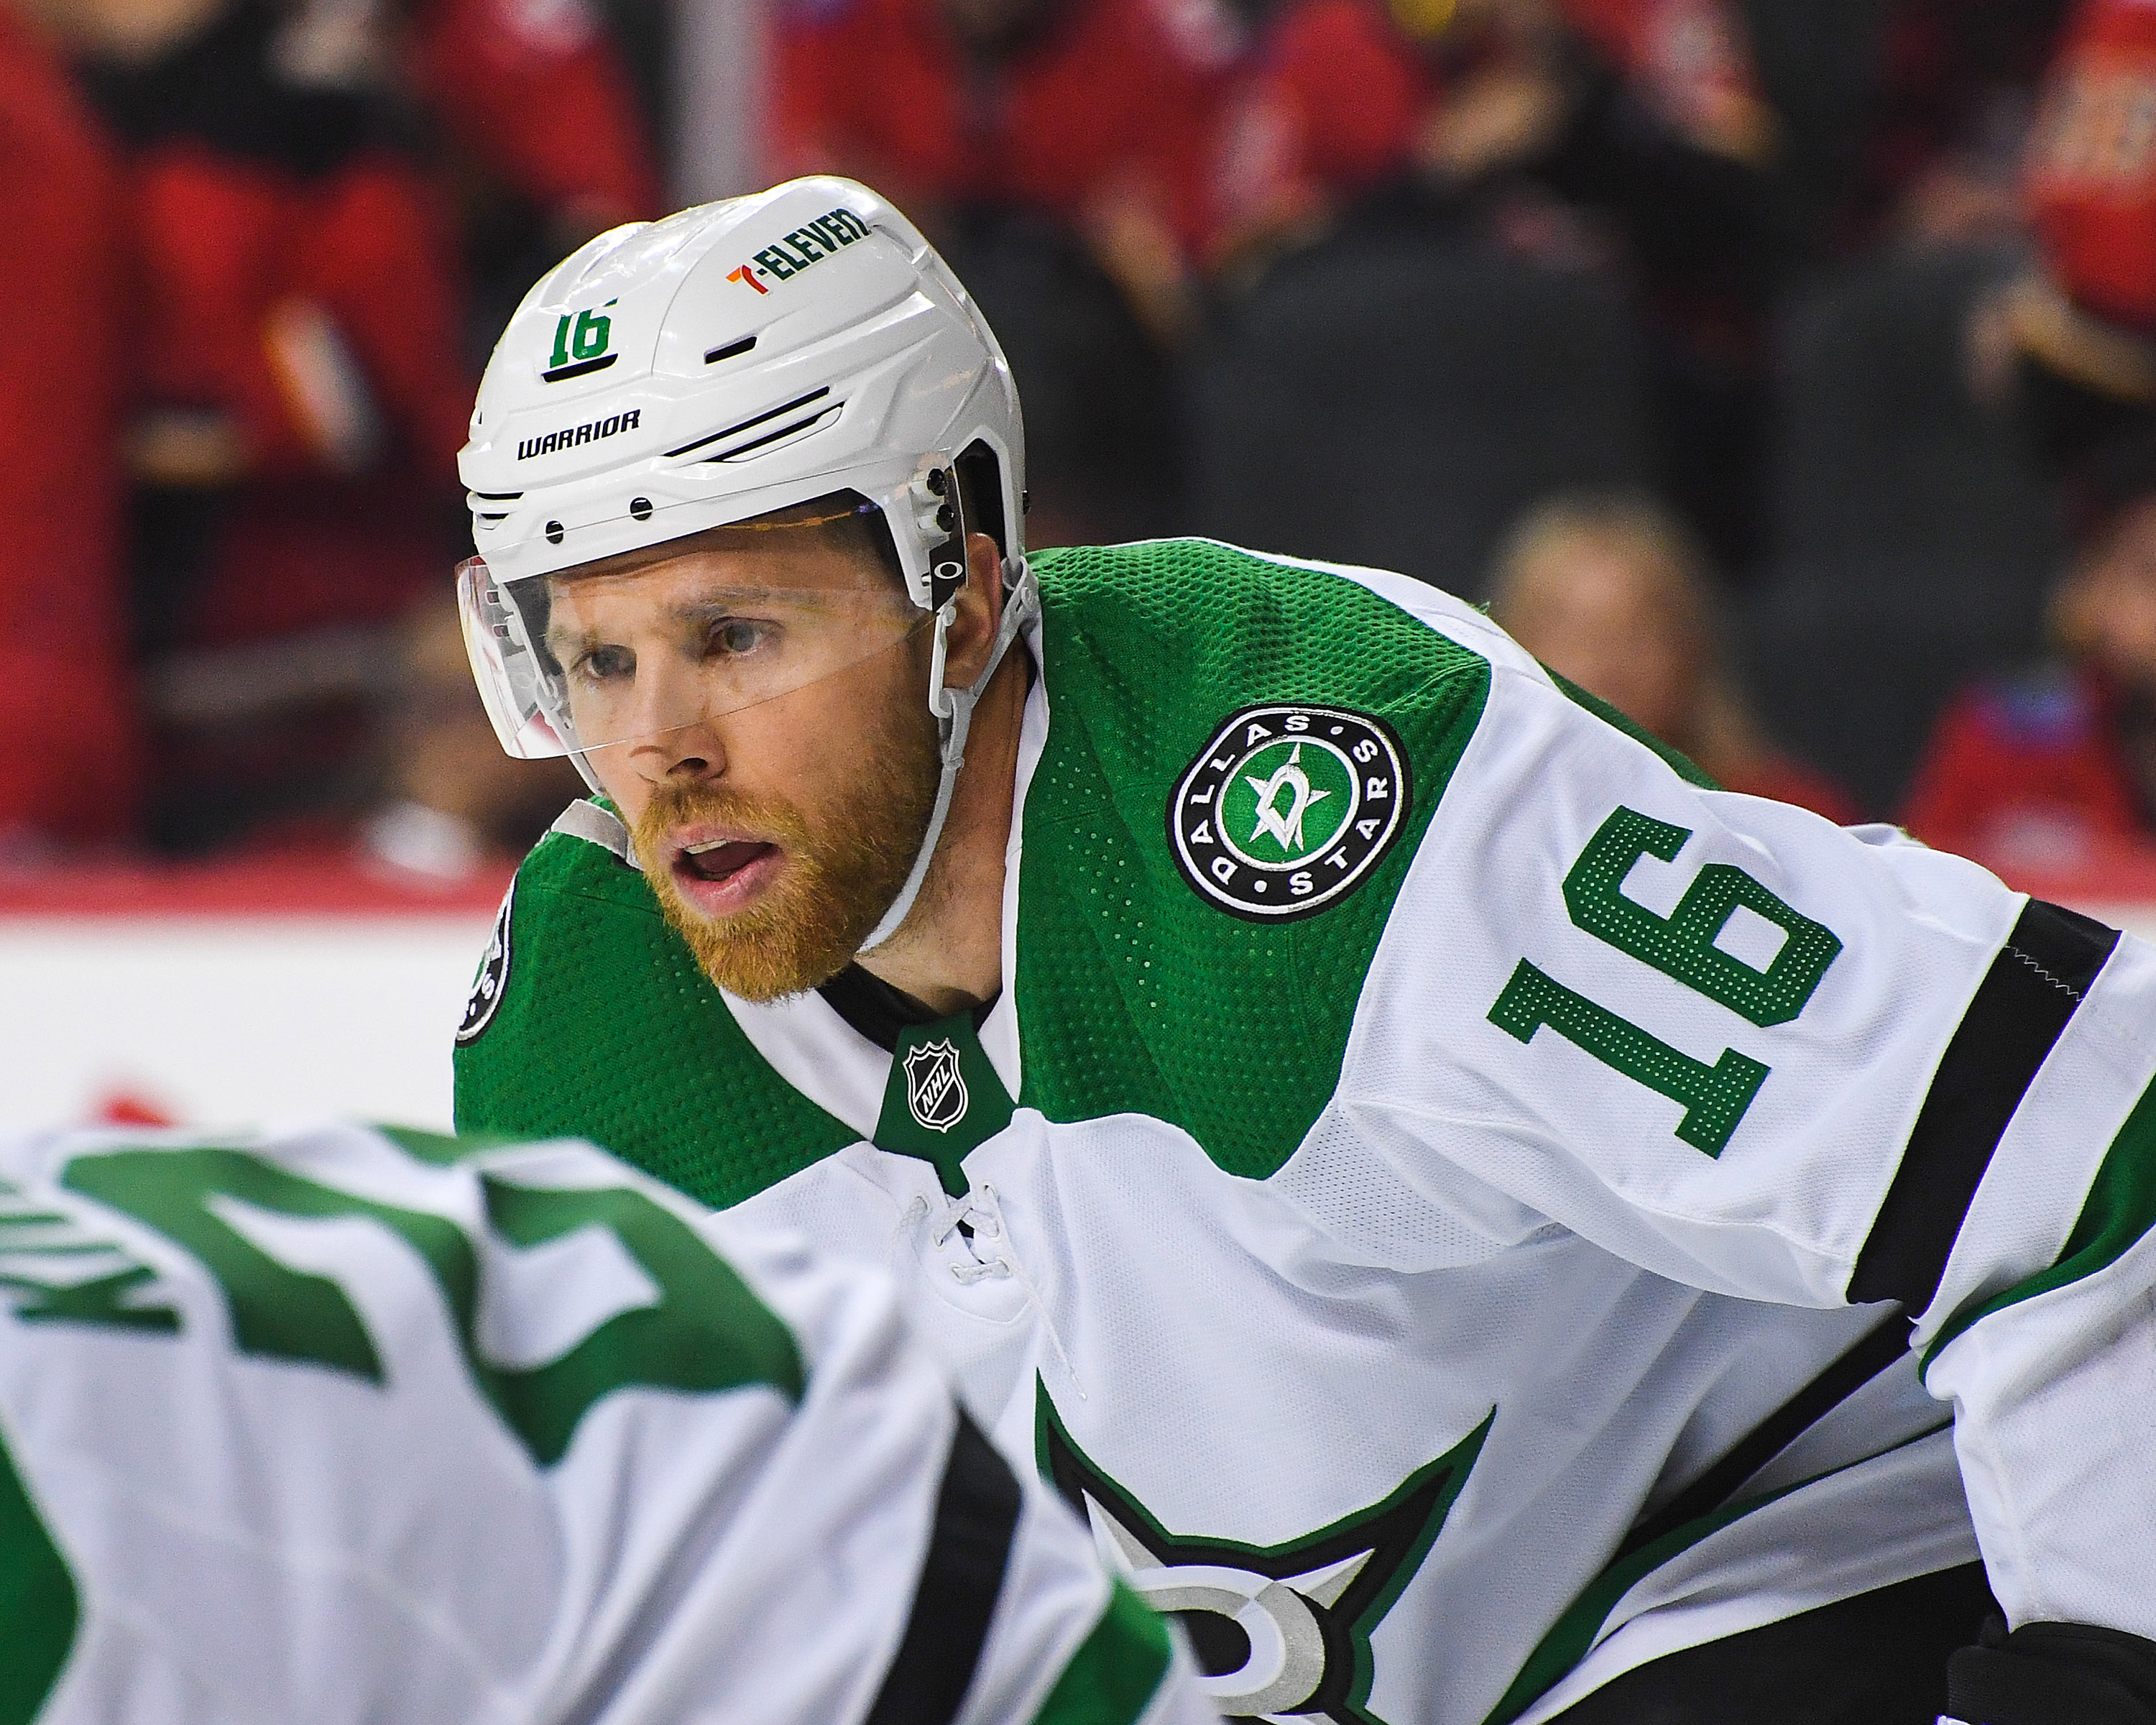 Joe Pavelski of the Dallas Stars in action against the Calgary Flames during Game Five of the First Round of the 2022 Stanley Cup Playoffs at Scotiabank Saddledome on May 11, 2022 in Calgary, Alberta, Canada. The Flames defeated the Stars 3-1.